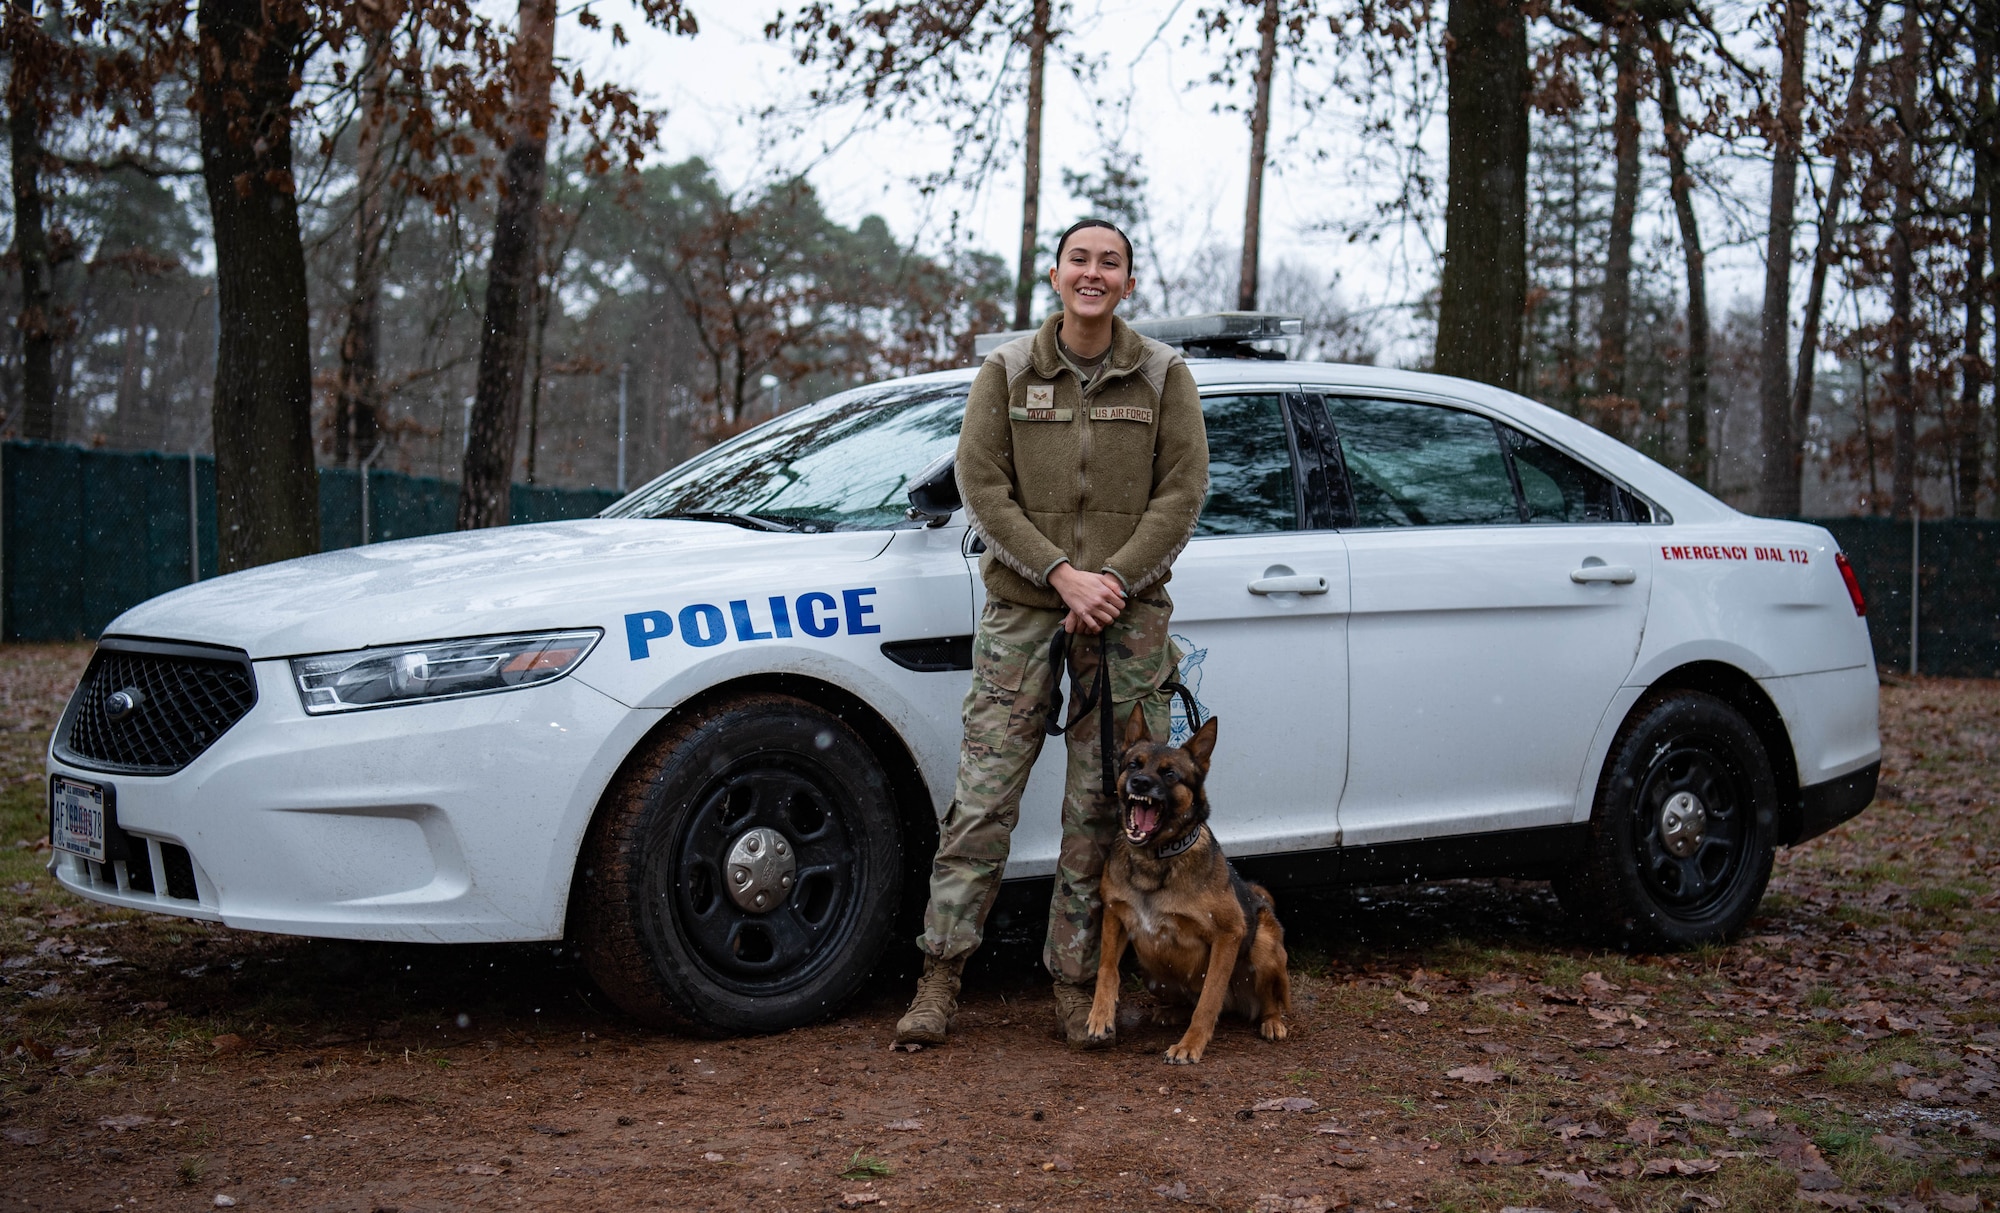 U.S. Air Force Senior Airman Hannah Taylor, 86th Security Forces Squadron military working dog handler poses for a photo at Ramstein Air Base, Germany, Dec. 10, 2021. The 569th United States Forces Police Squadron is a U.S. Military Law Enforcement Unit that serves and protects the Kaiserslautern Military Community. (U.S. Air Force photo by Airman Jared Lovett)